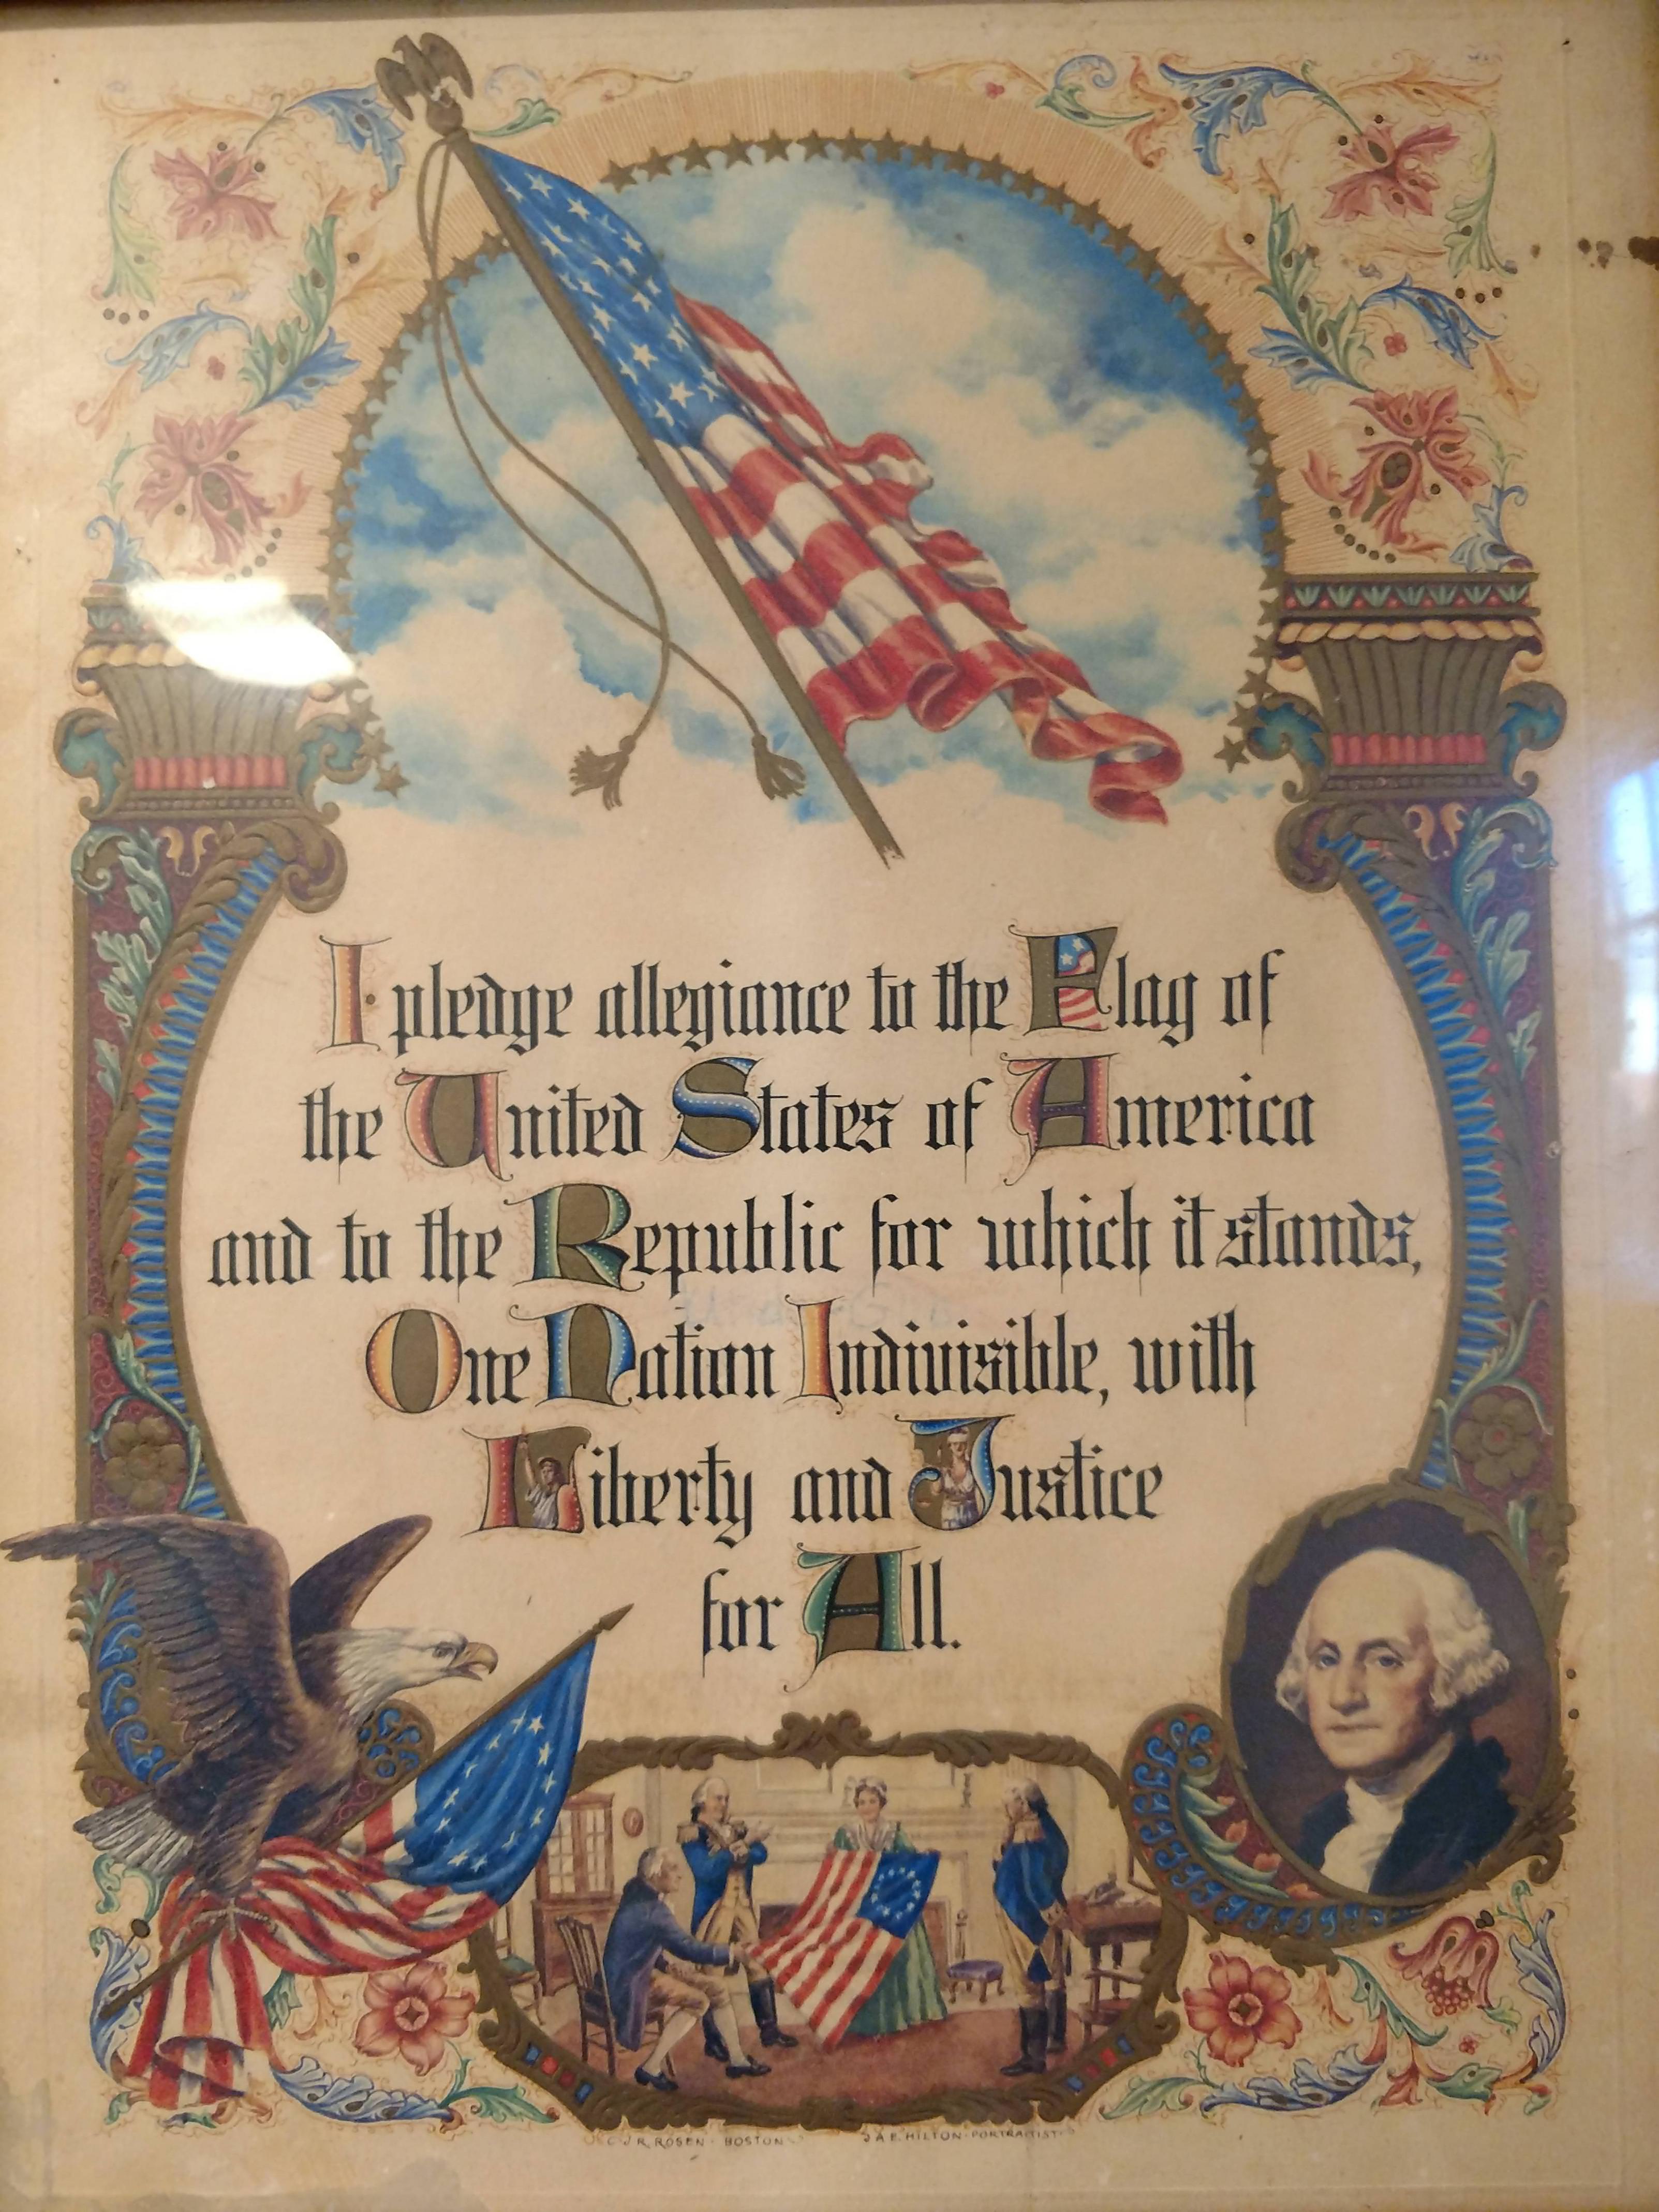 Antique Pledge of Allegiance poster seems to be missing something...